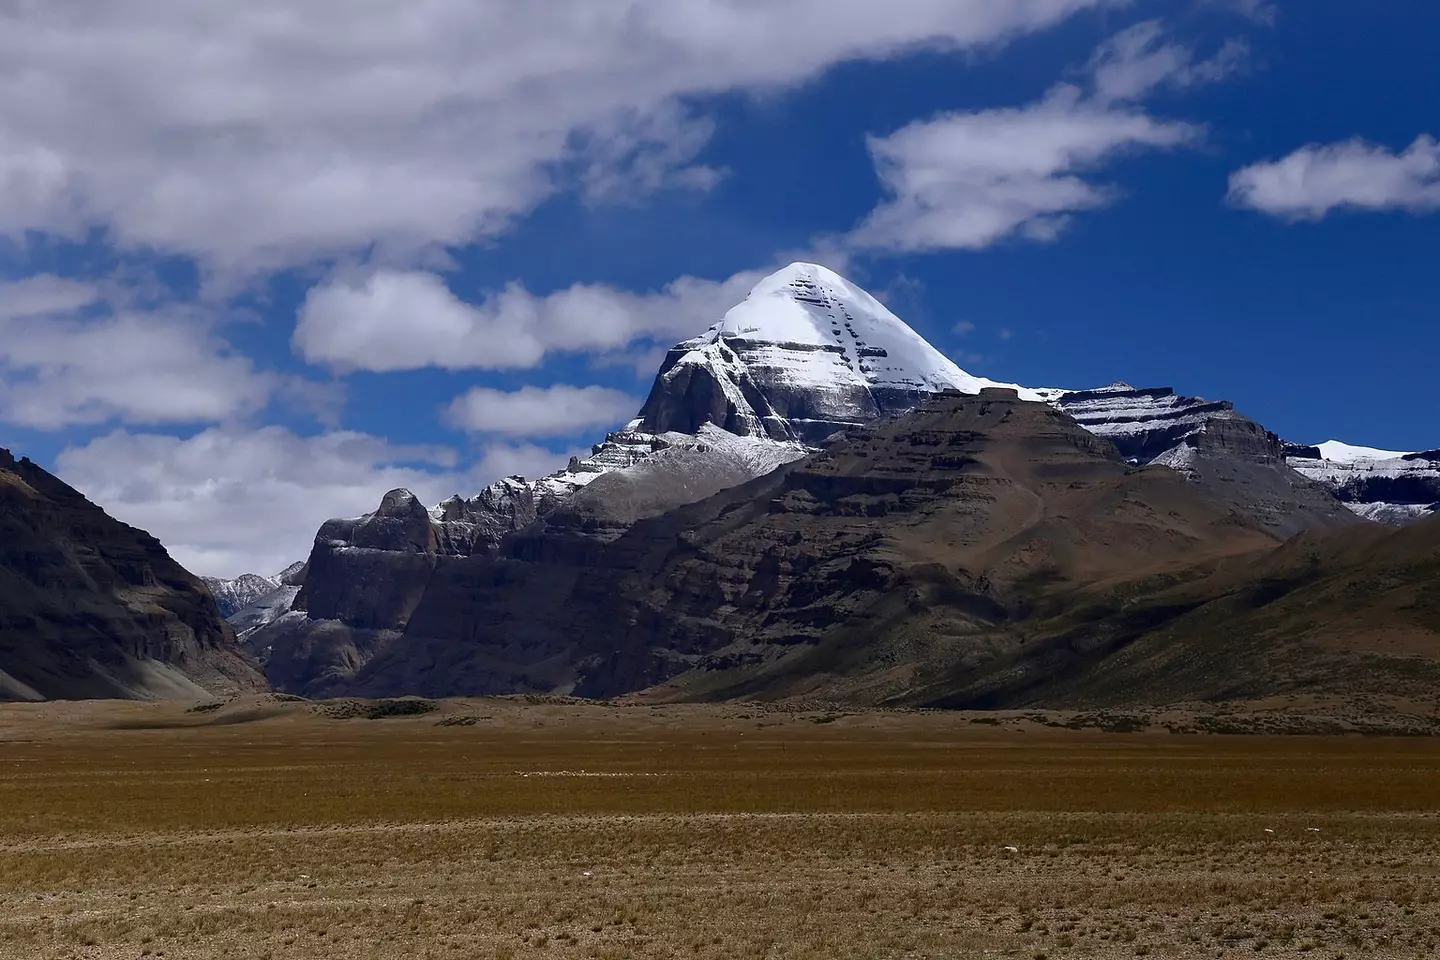 Mount Kailasa has never been climbed before.